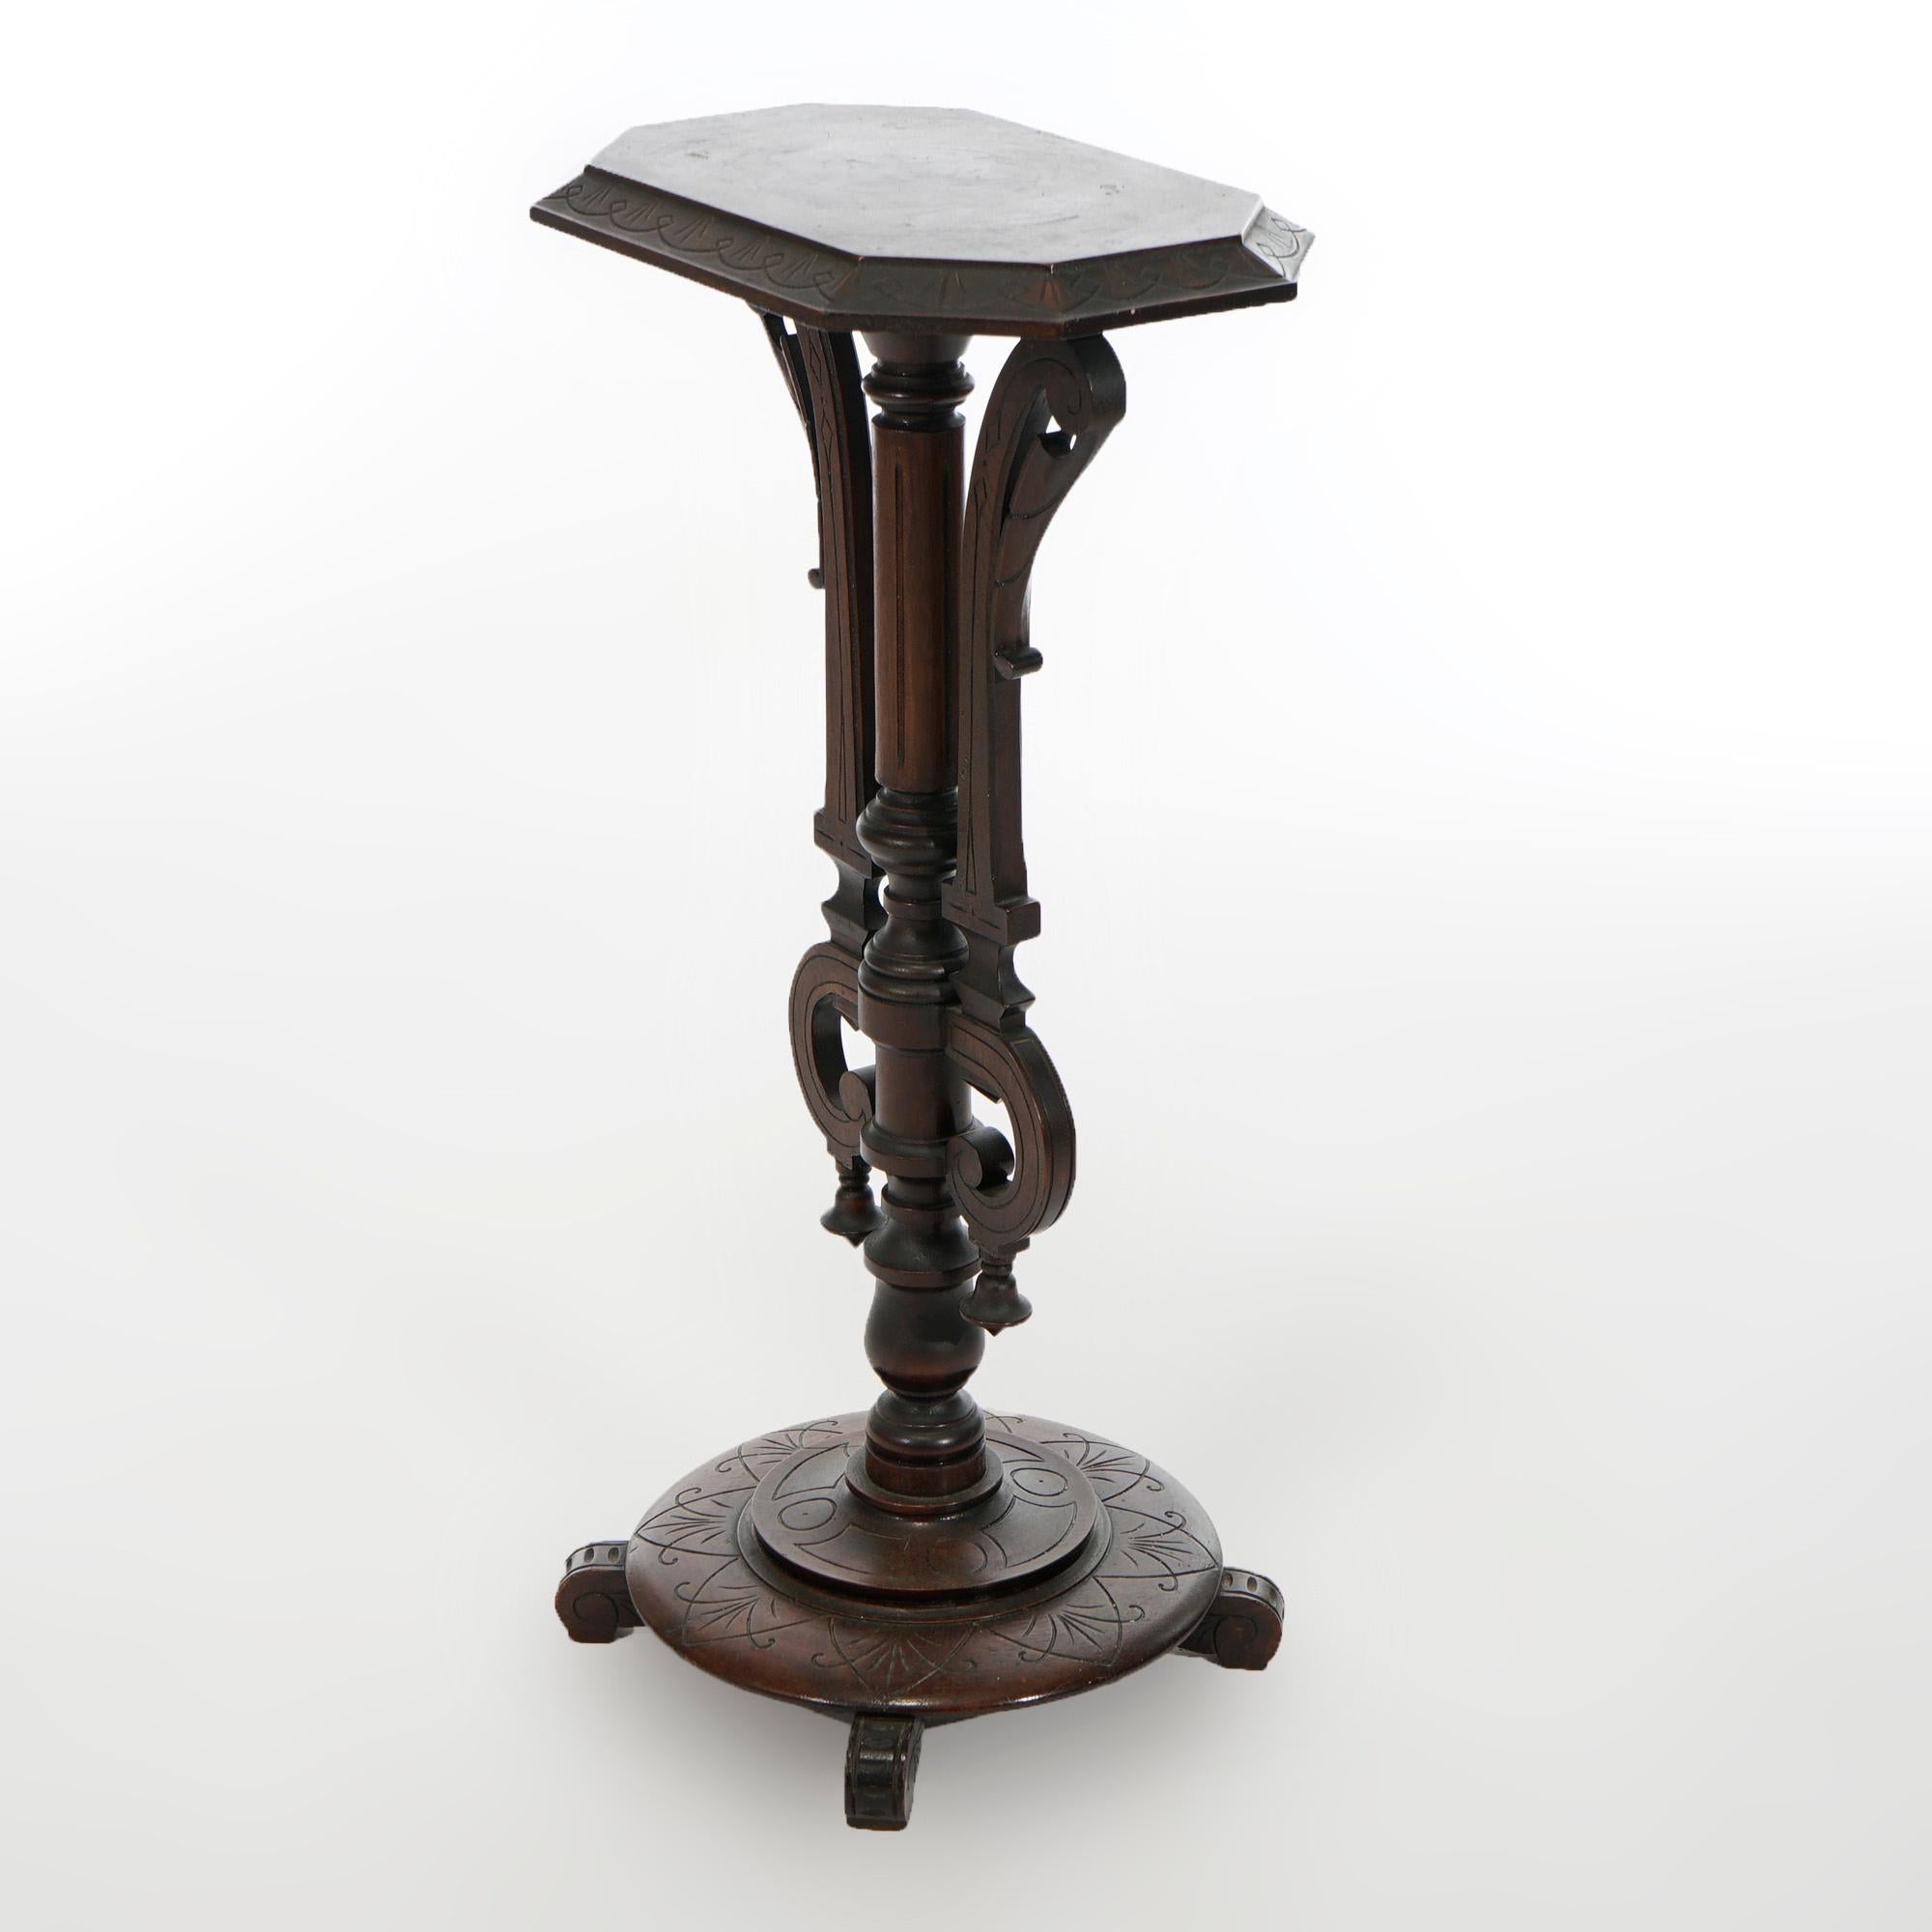 Antique Aesthetic Movement Carved Walnut Sculpture Display Pedestal Circa 1890 For Sale 1